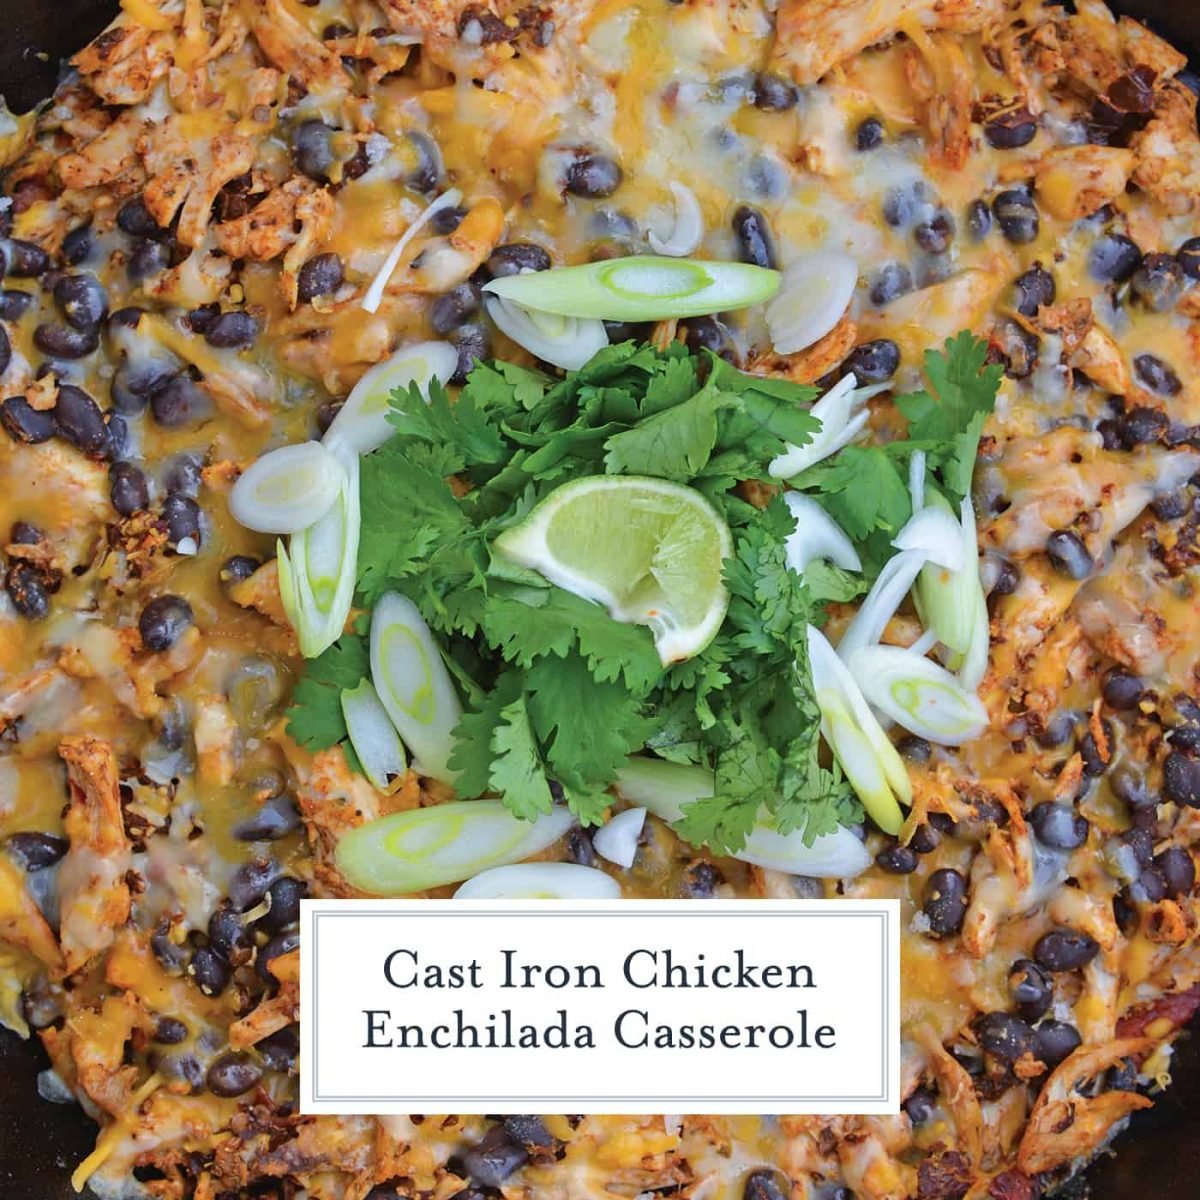 This Chicken Enchilada Casserole Recipe is a delicious casserole recipe loaded with a cornbread crust, chicken, beans, and cheese, all made in a cast iron skillet! #chickenenchiladacasserole #castironskilletrecipes www.savoryexperiments.com